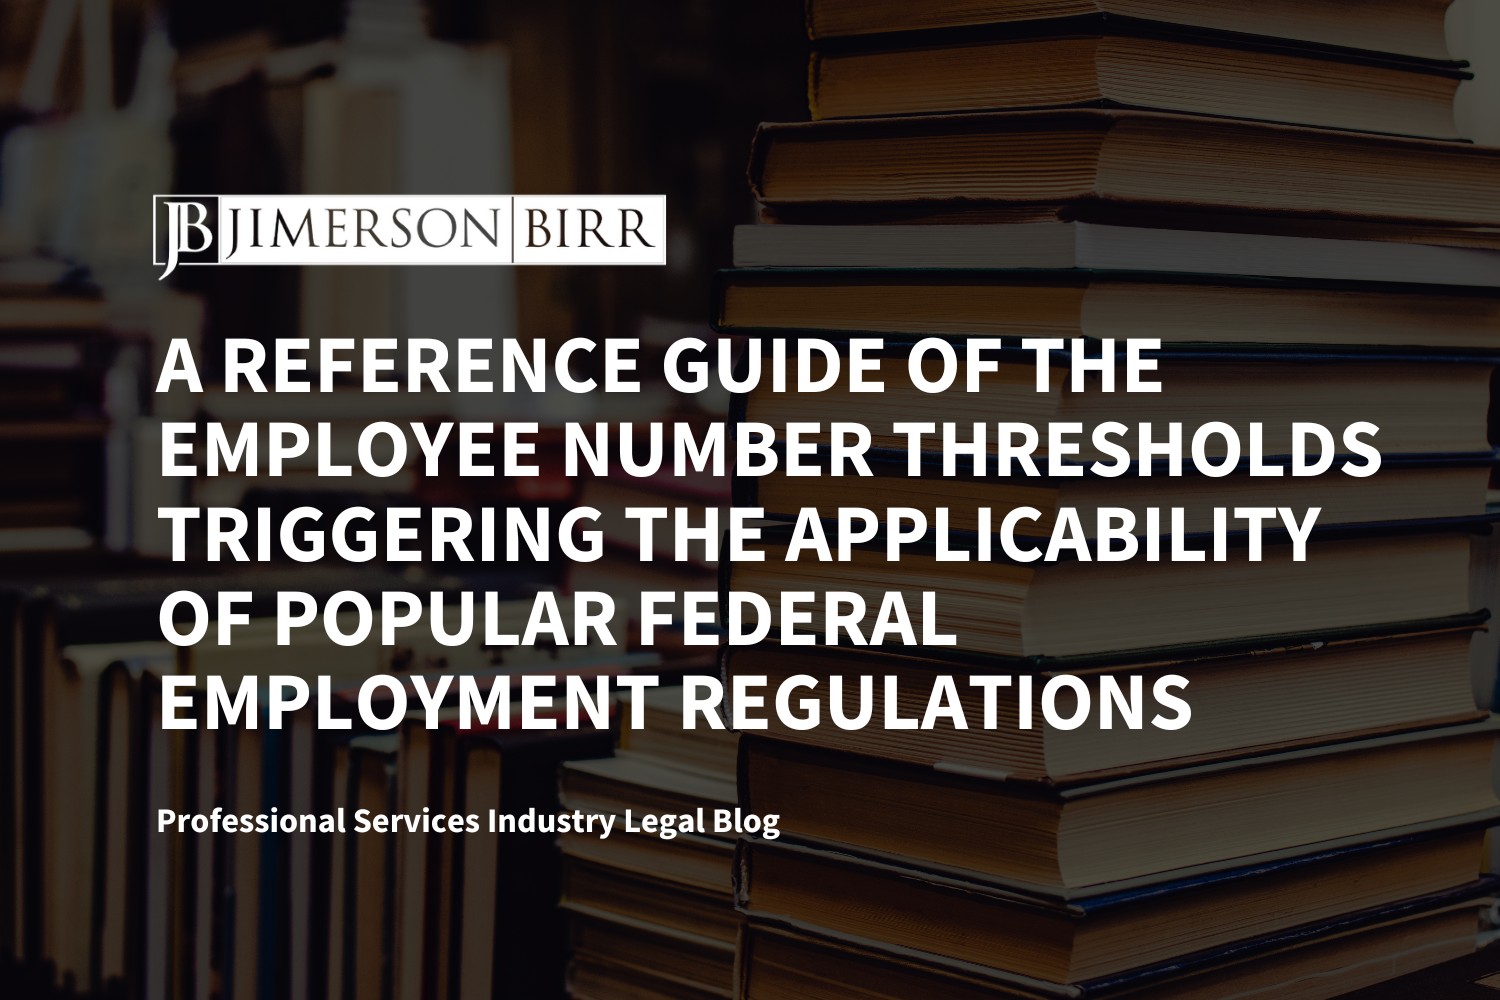 A Reference Guide of the Employee Number Thresholds Triggering the Applicability of Popular Federal Employment Regulations